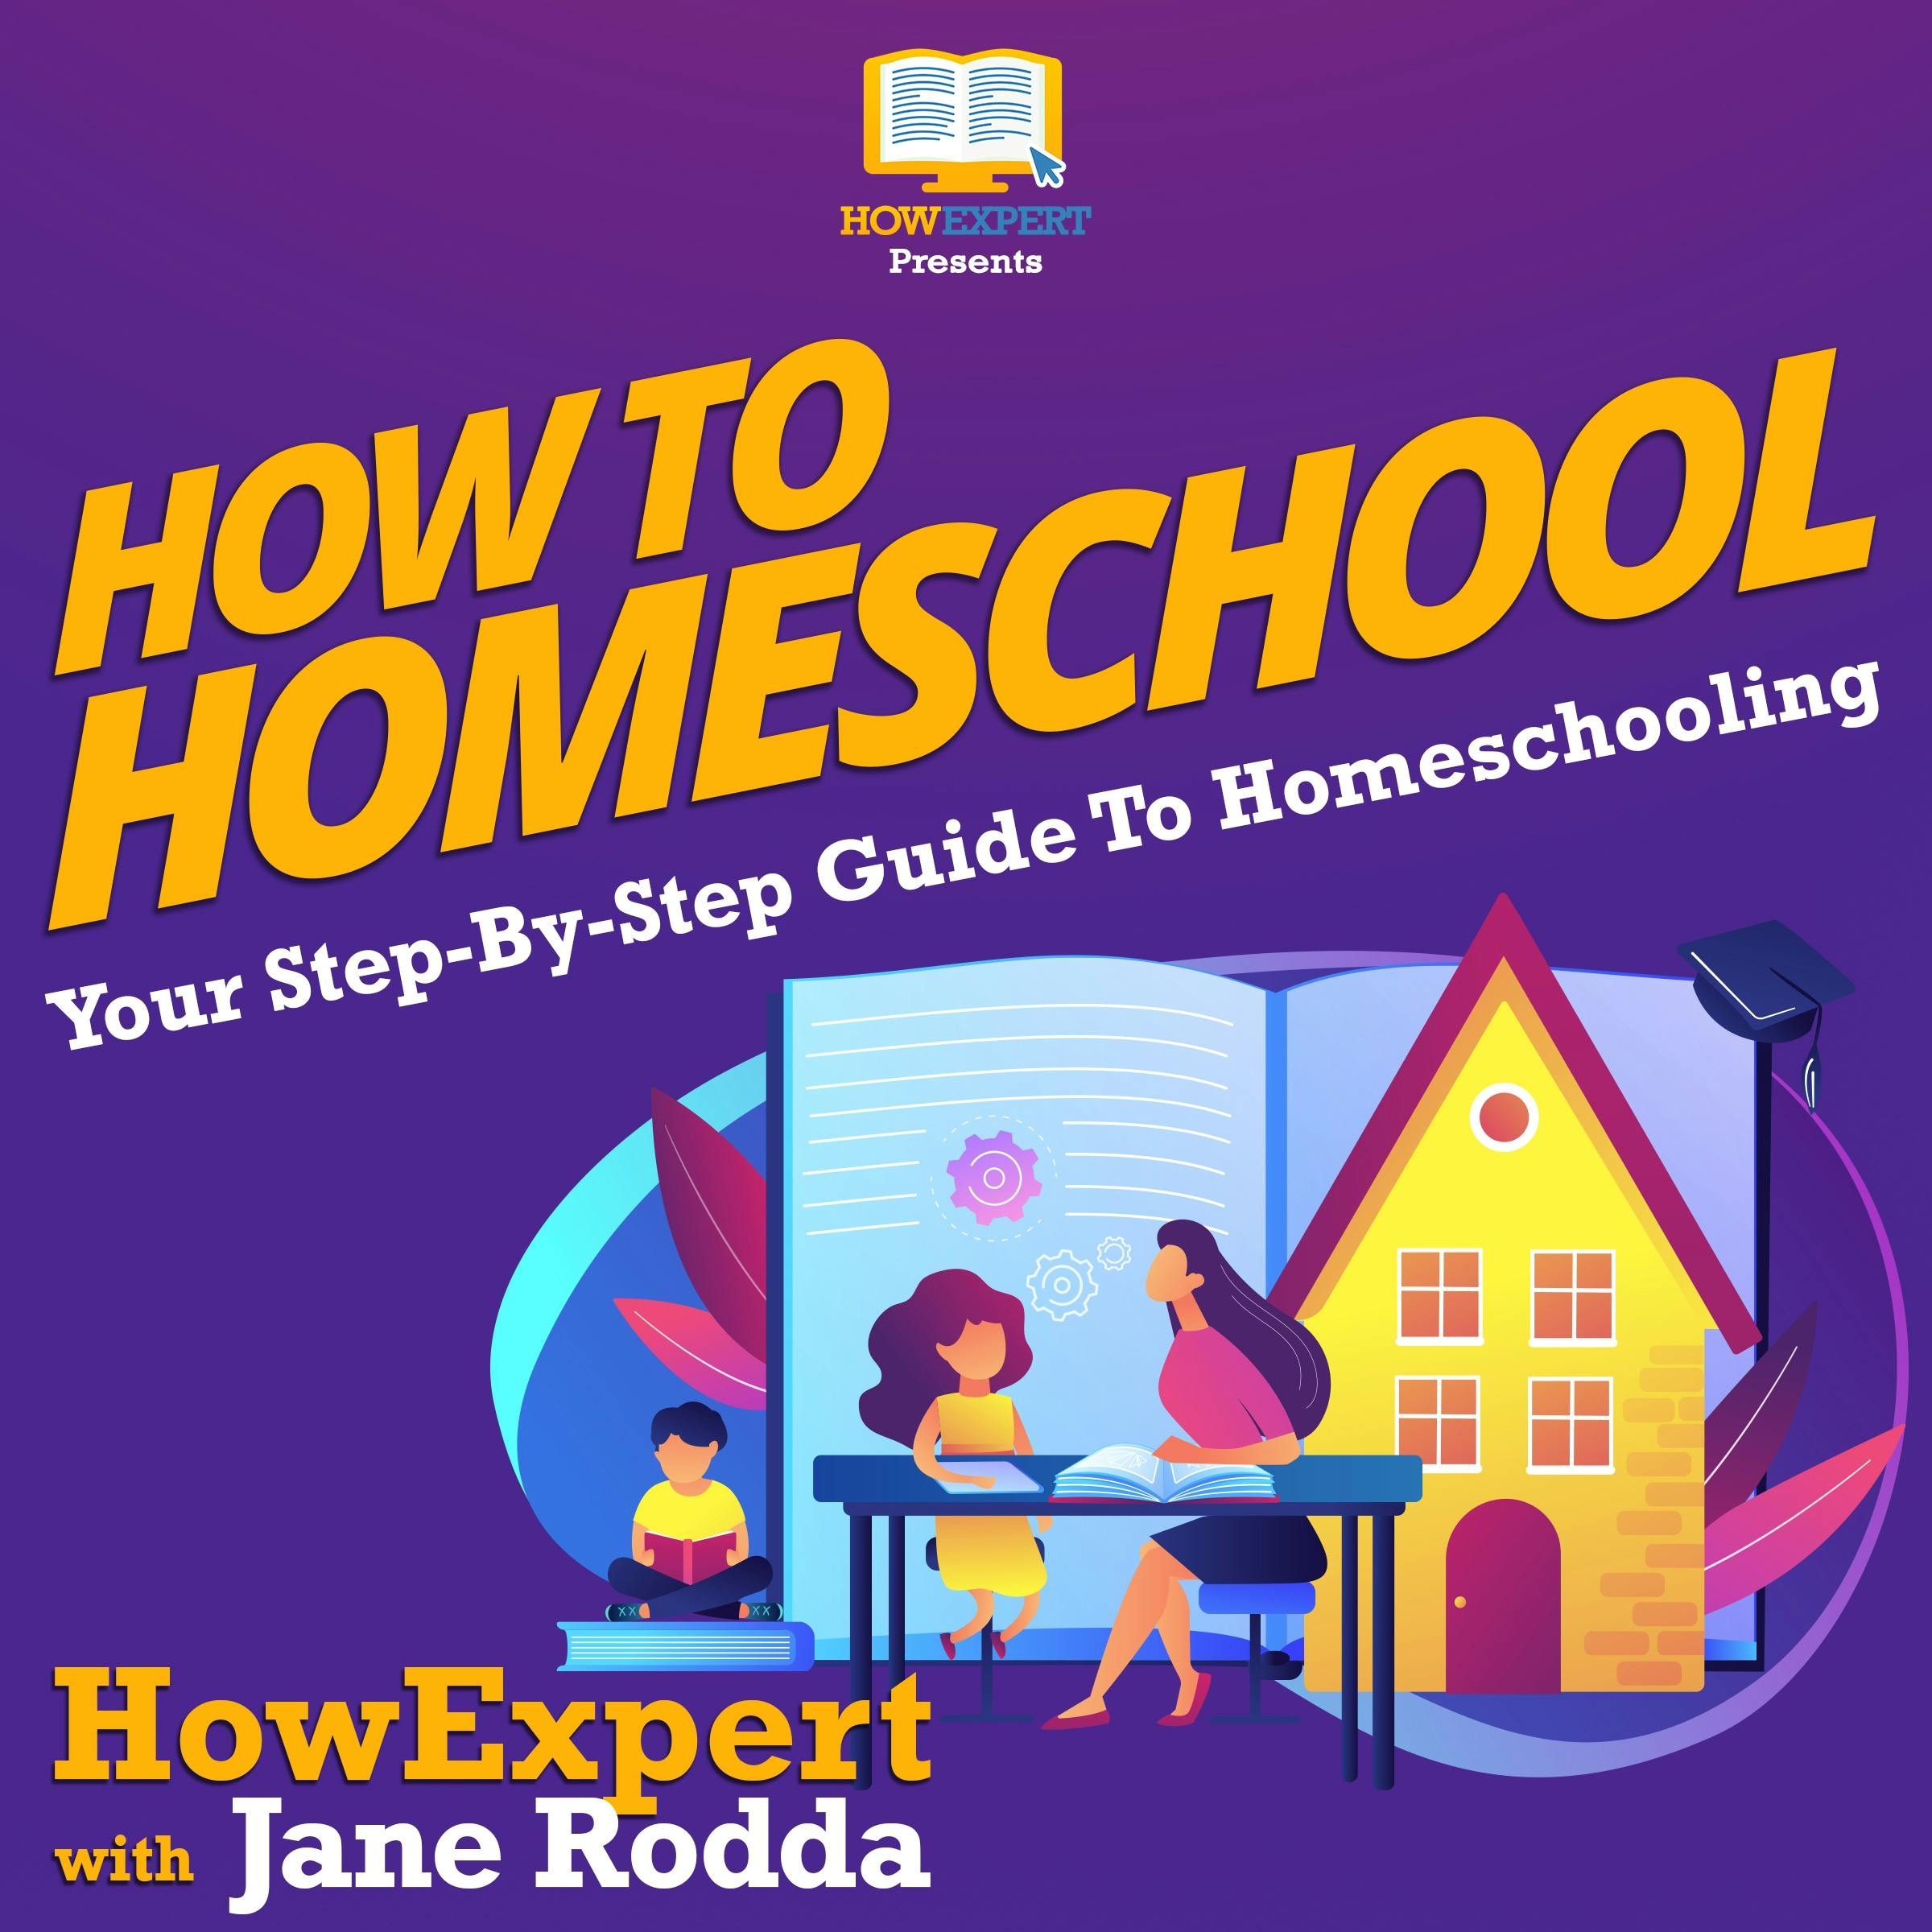 How To Homeschool: Your Step By Step Guide To Homeschooling - Jane Rodda, HowExpert